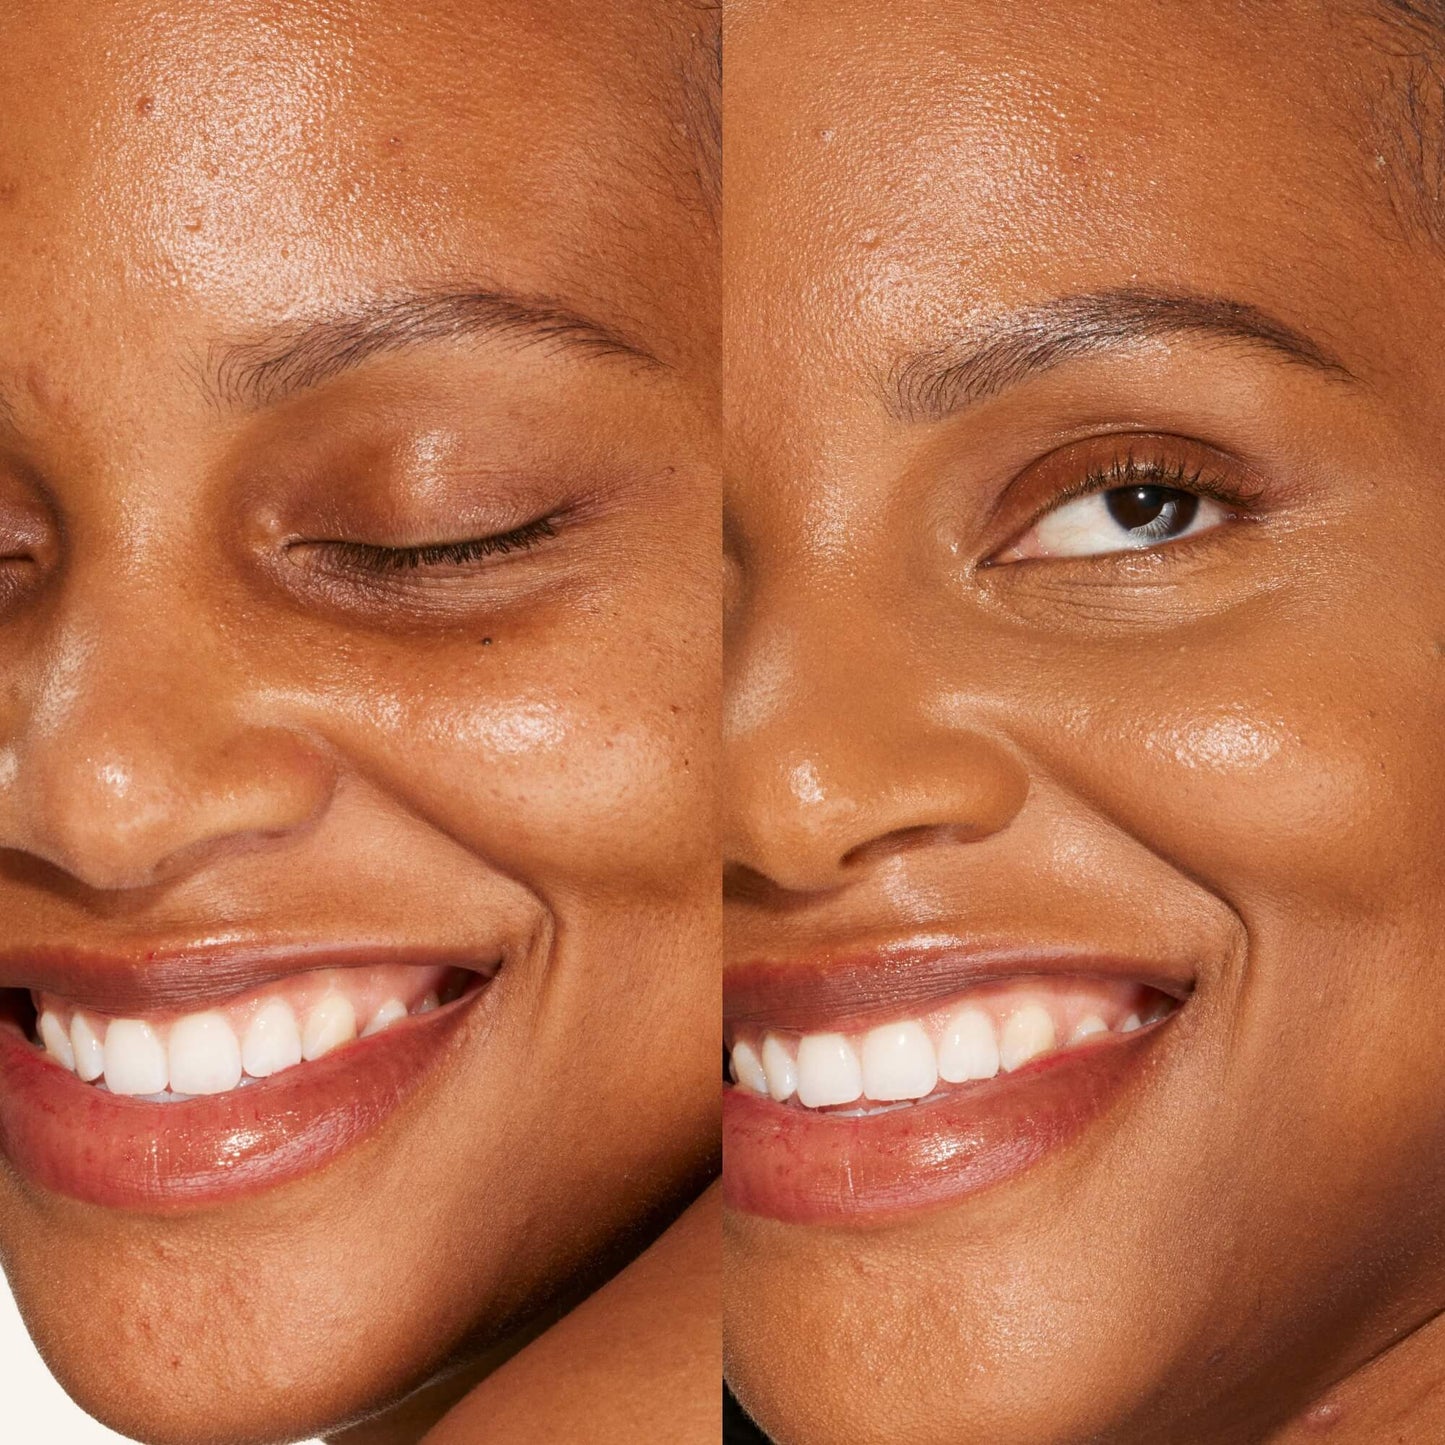 16.0 SB [A person's face before and after using Tower 28 Beauty's Swipe Serum Concealer in shade 16.0 SB to cover up dark circles, blemishes, and discoloration]